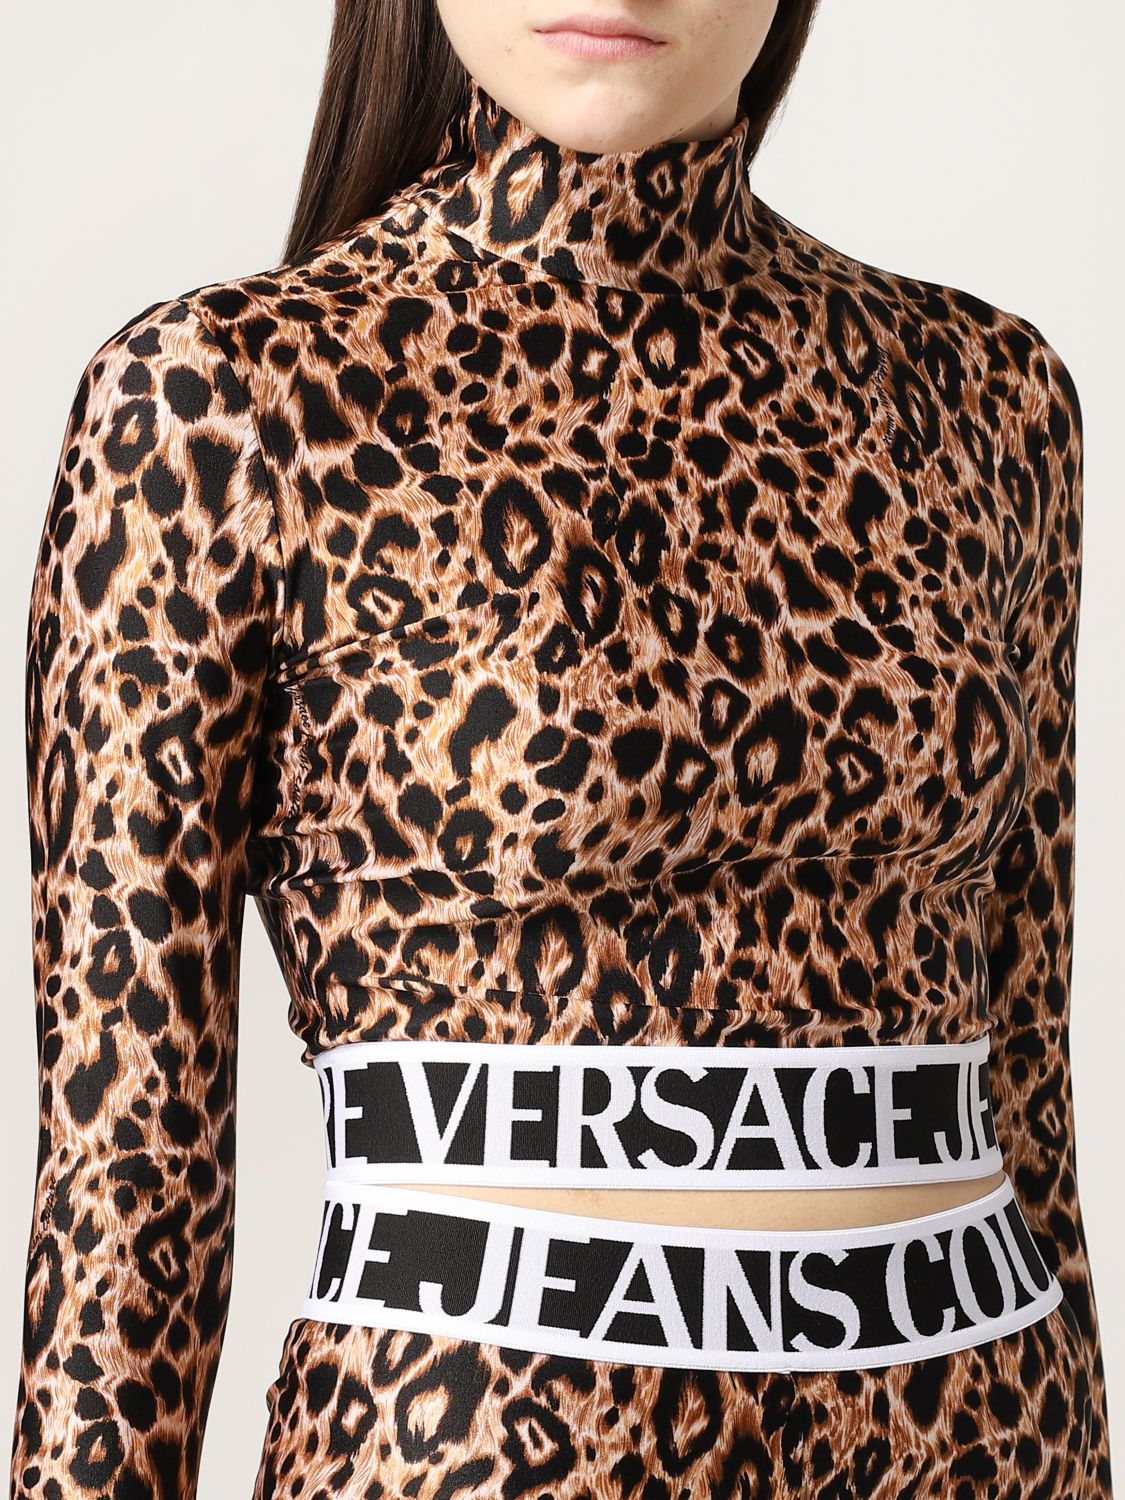 Top Versace Jeans Couture: Top mujer Versace Jeans Couture savannah 4